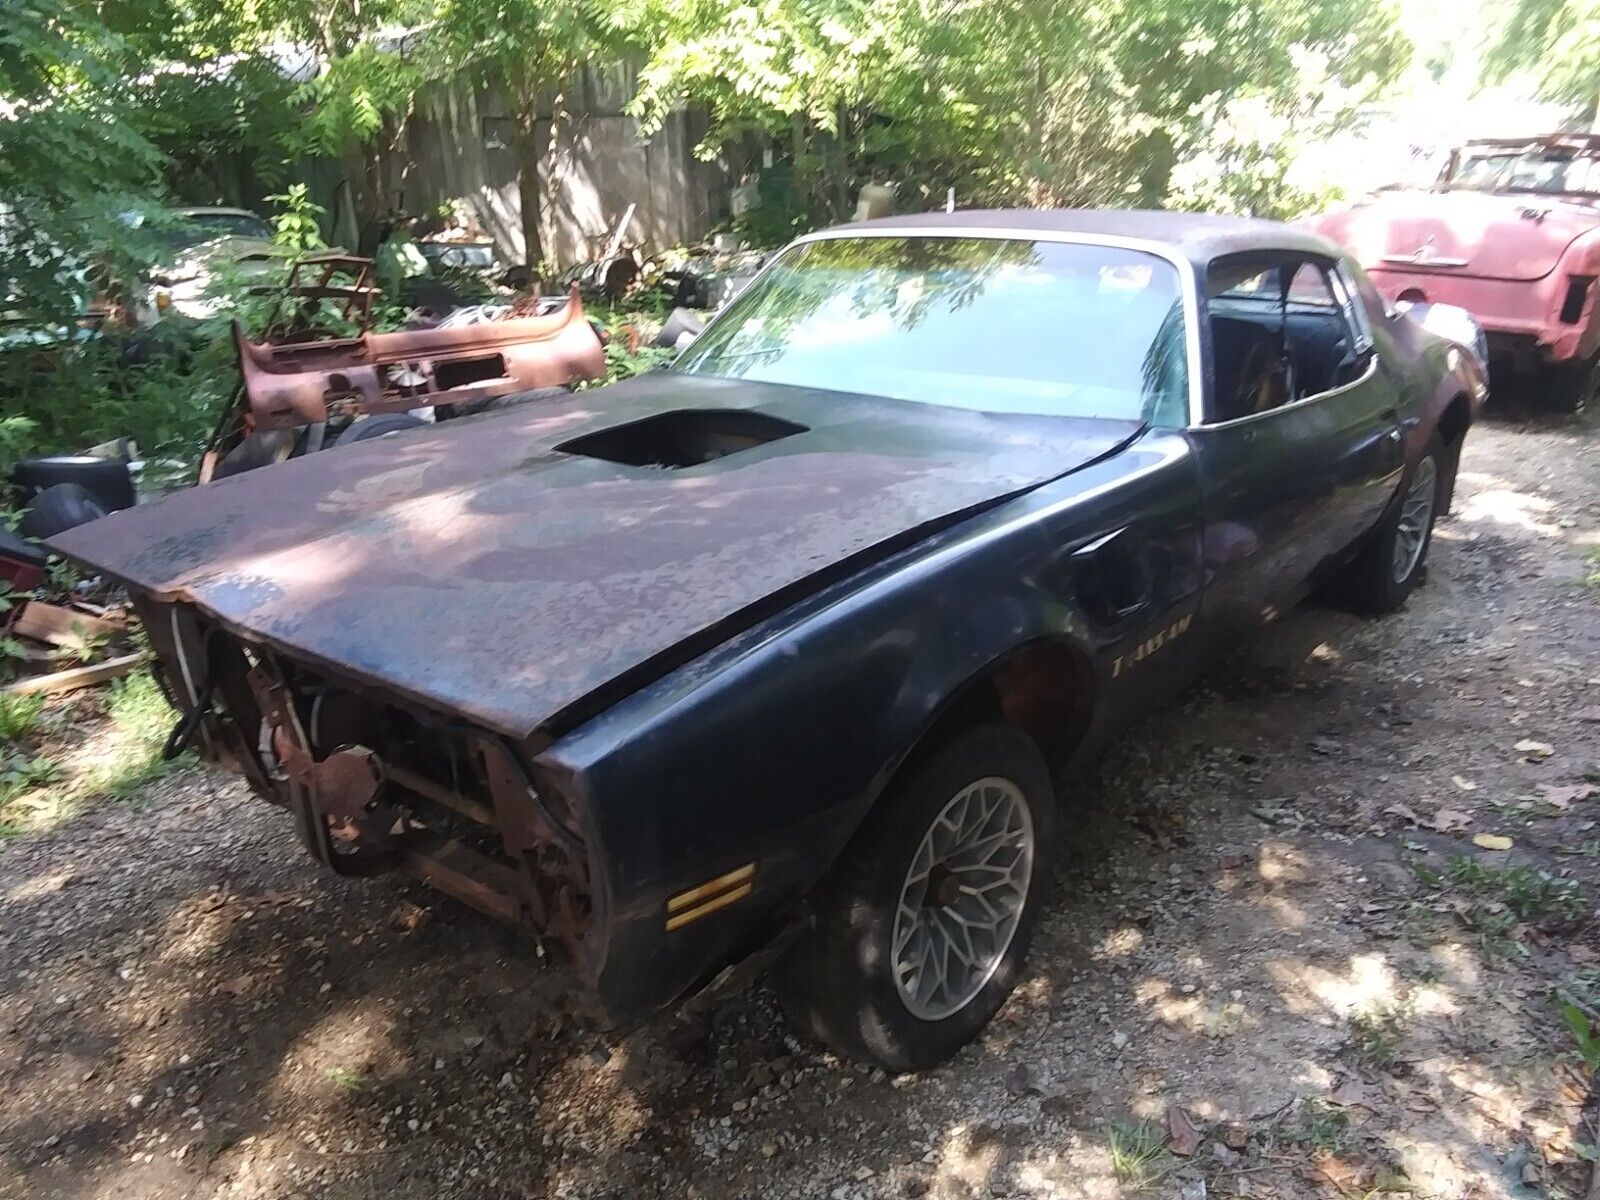 Please Explain How a 1977 Trans Am Ended Up in This Horrible Condition ...